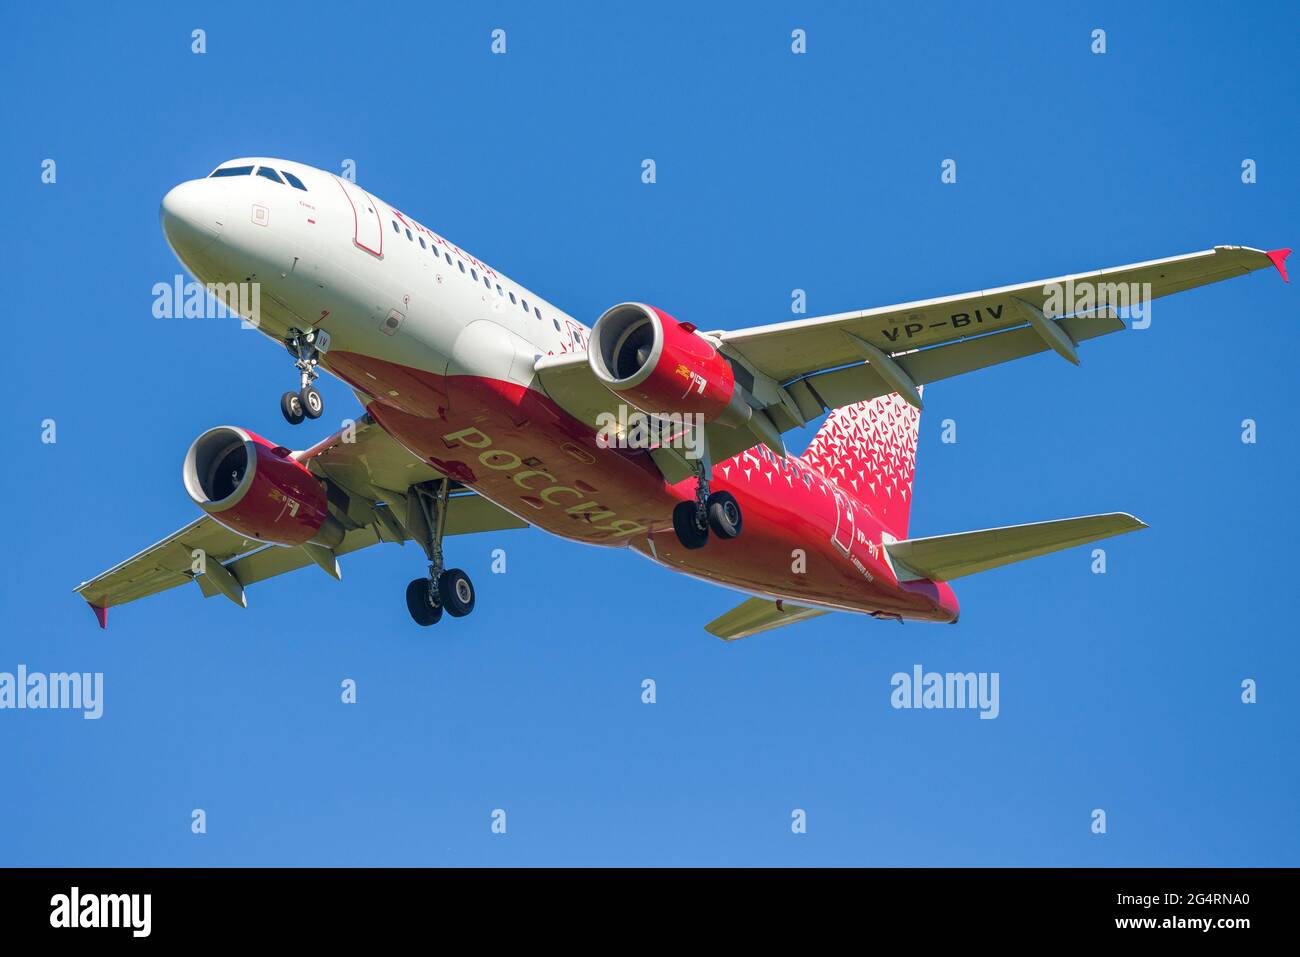 SAINT PETERSBURG, RUSSIA - OCTOBER 28, 2020: Airbus A319-115LR 'Omsk' (VP-BIV) aircraft of Rossiya airlines on the glide path close-up Stock Photo